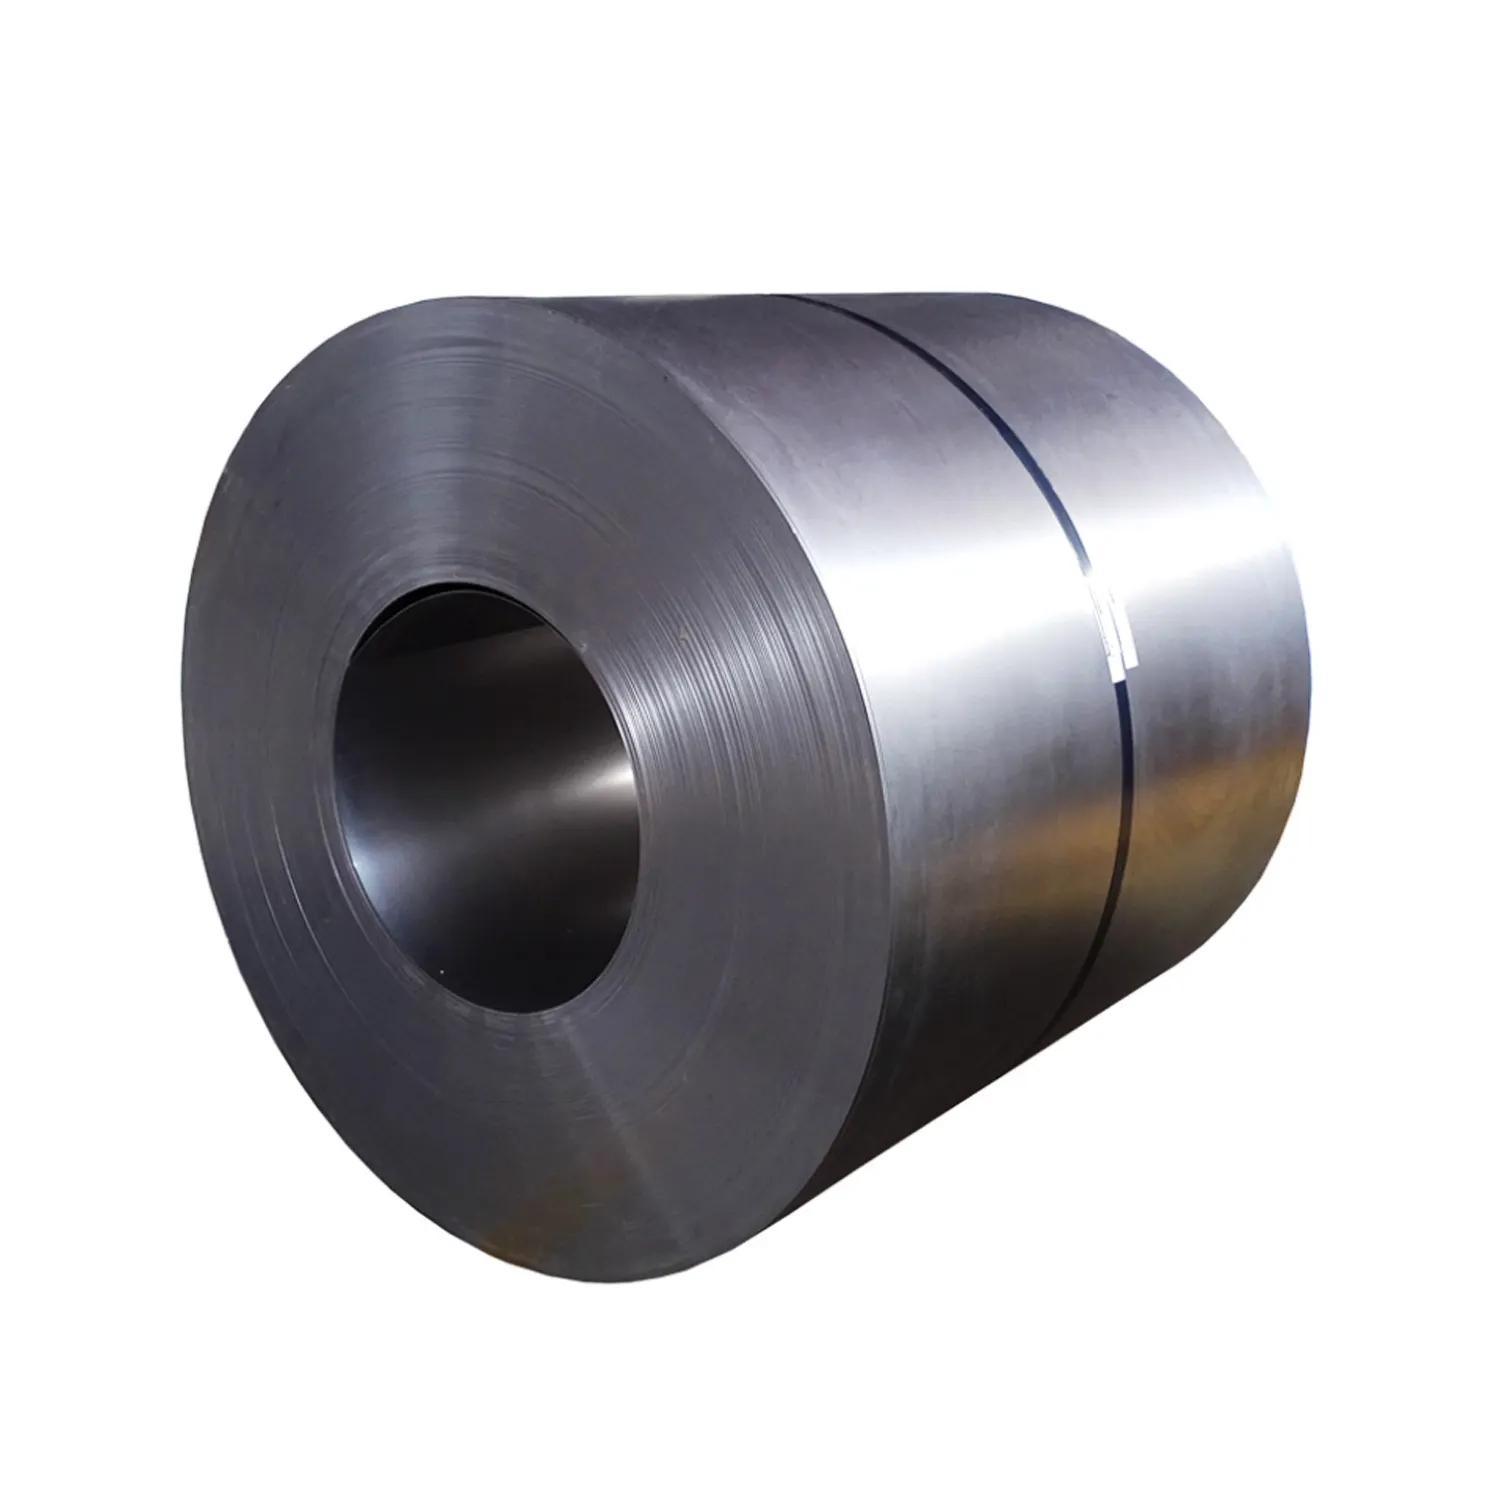 DC01 SPCC CRC Mild coil ASTM prime quality cold rolled steel coils price 5 10 Reviews 1 buyer